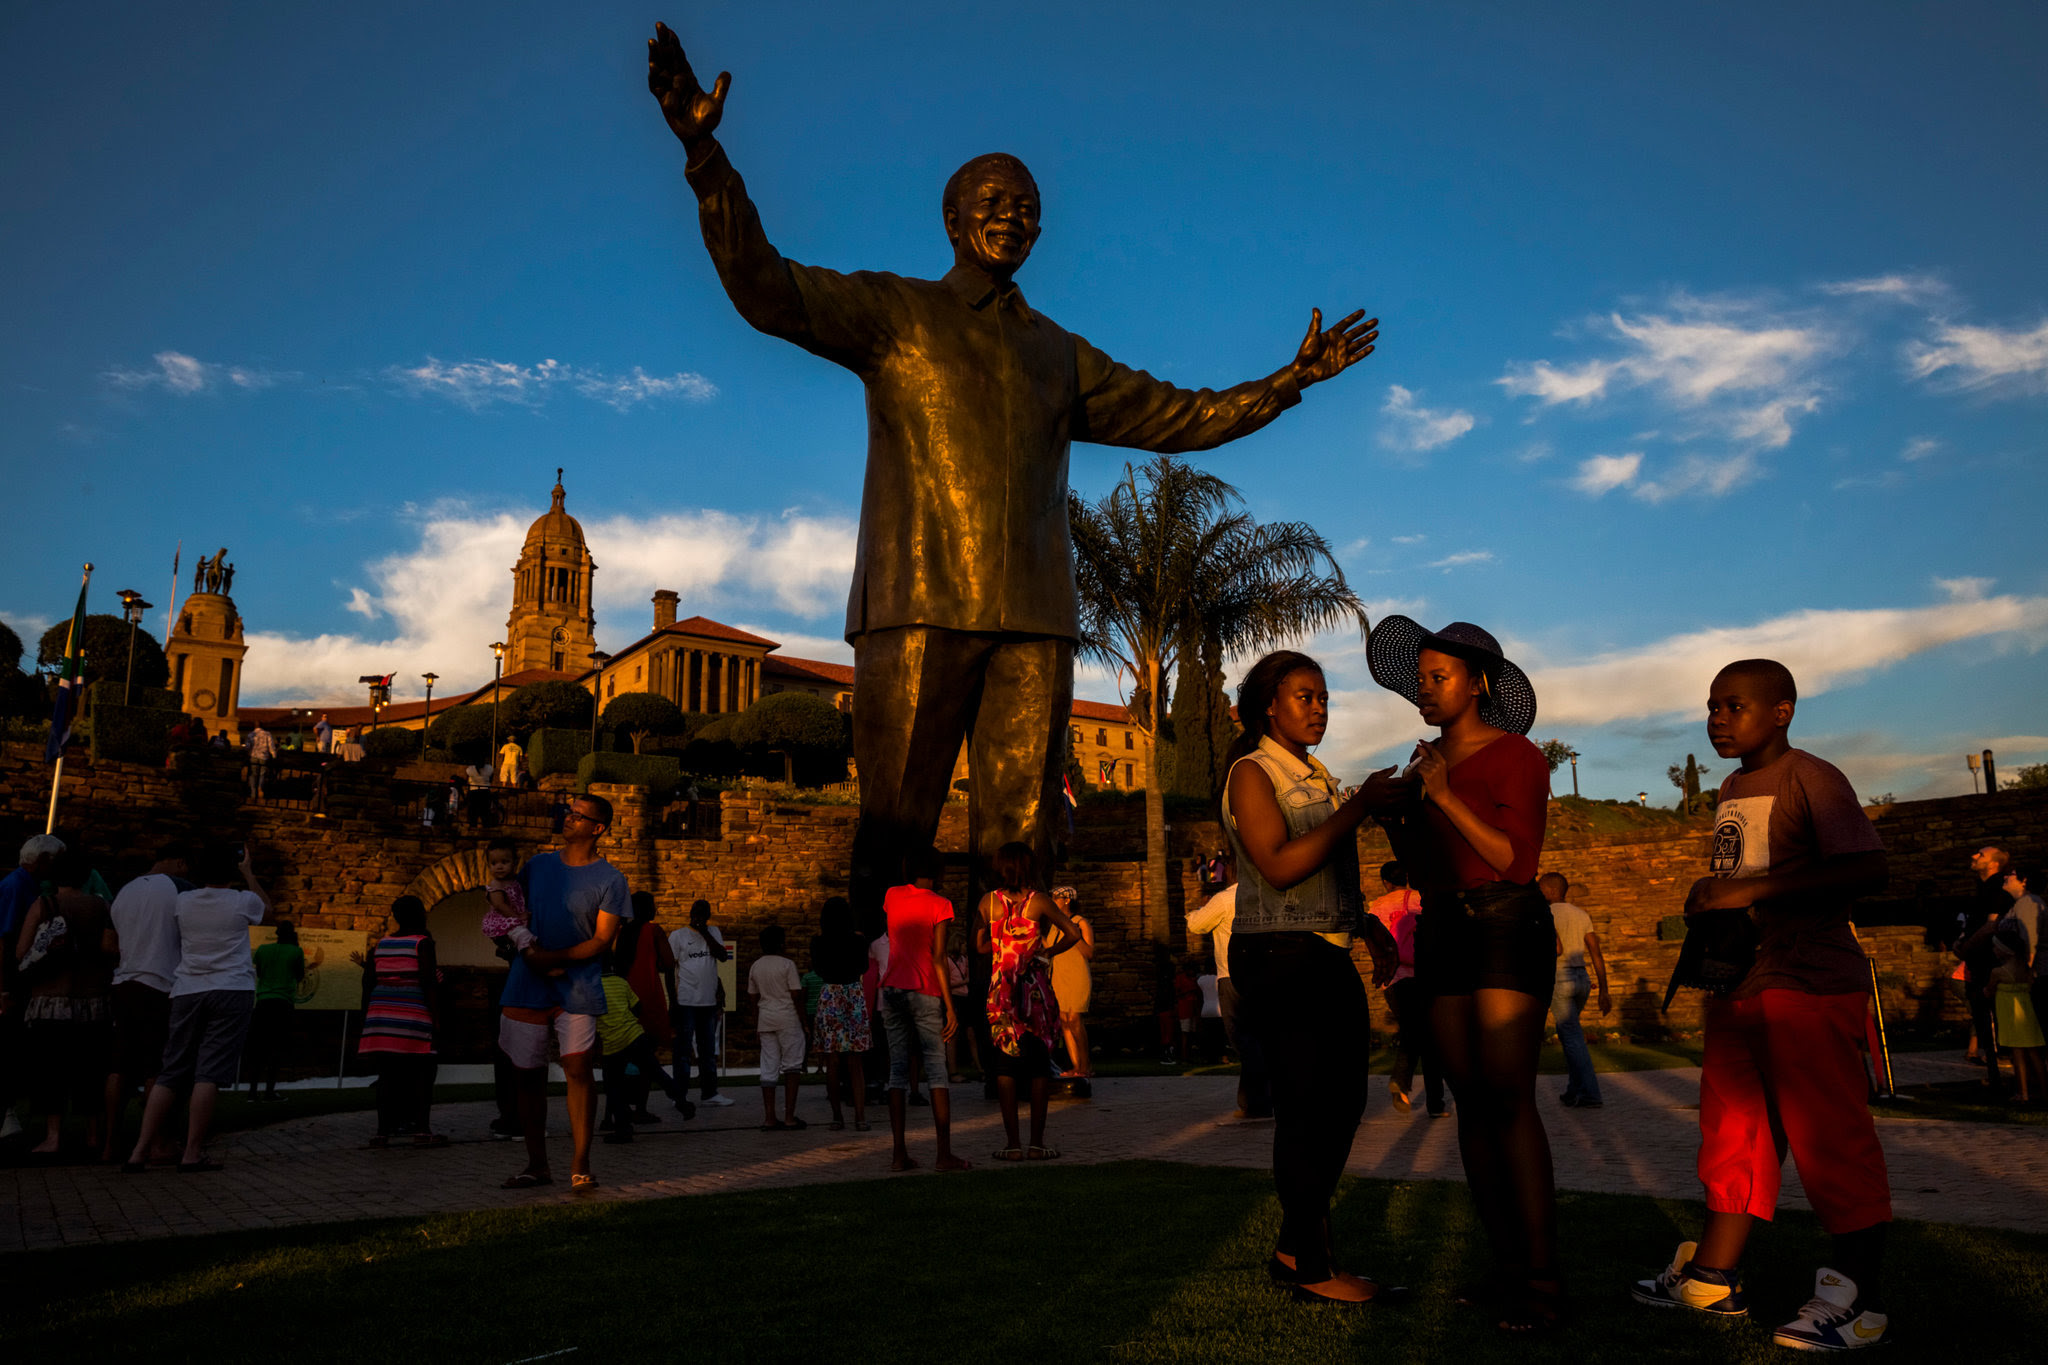 A statue of Nelson Mandela in Pretoria. While Mr. Mandela is still revered in the West, his legacy is regarded more harshly in South Africa, especially by young blacks. Credit Daniel Berehulak for The New York Times 